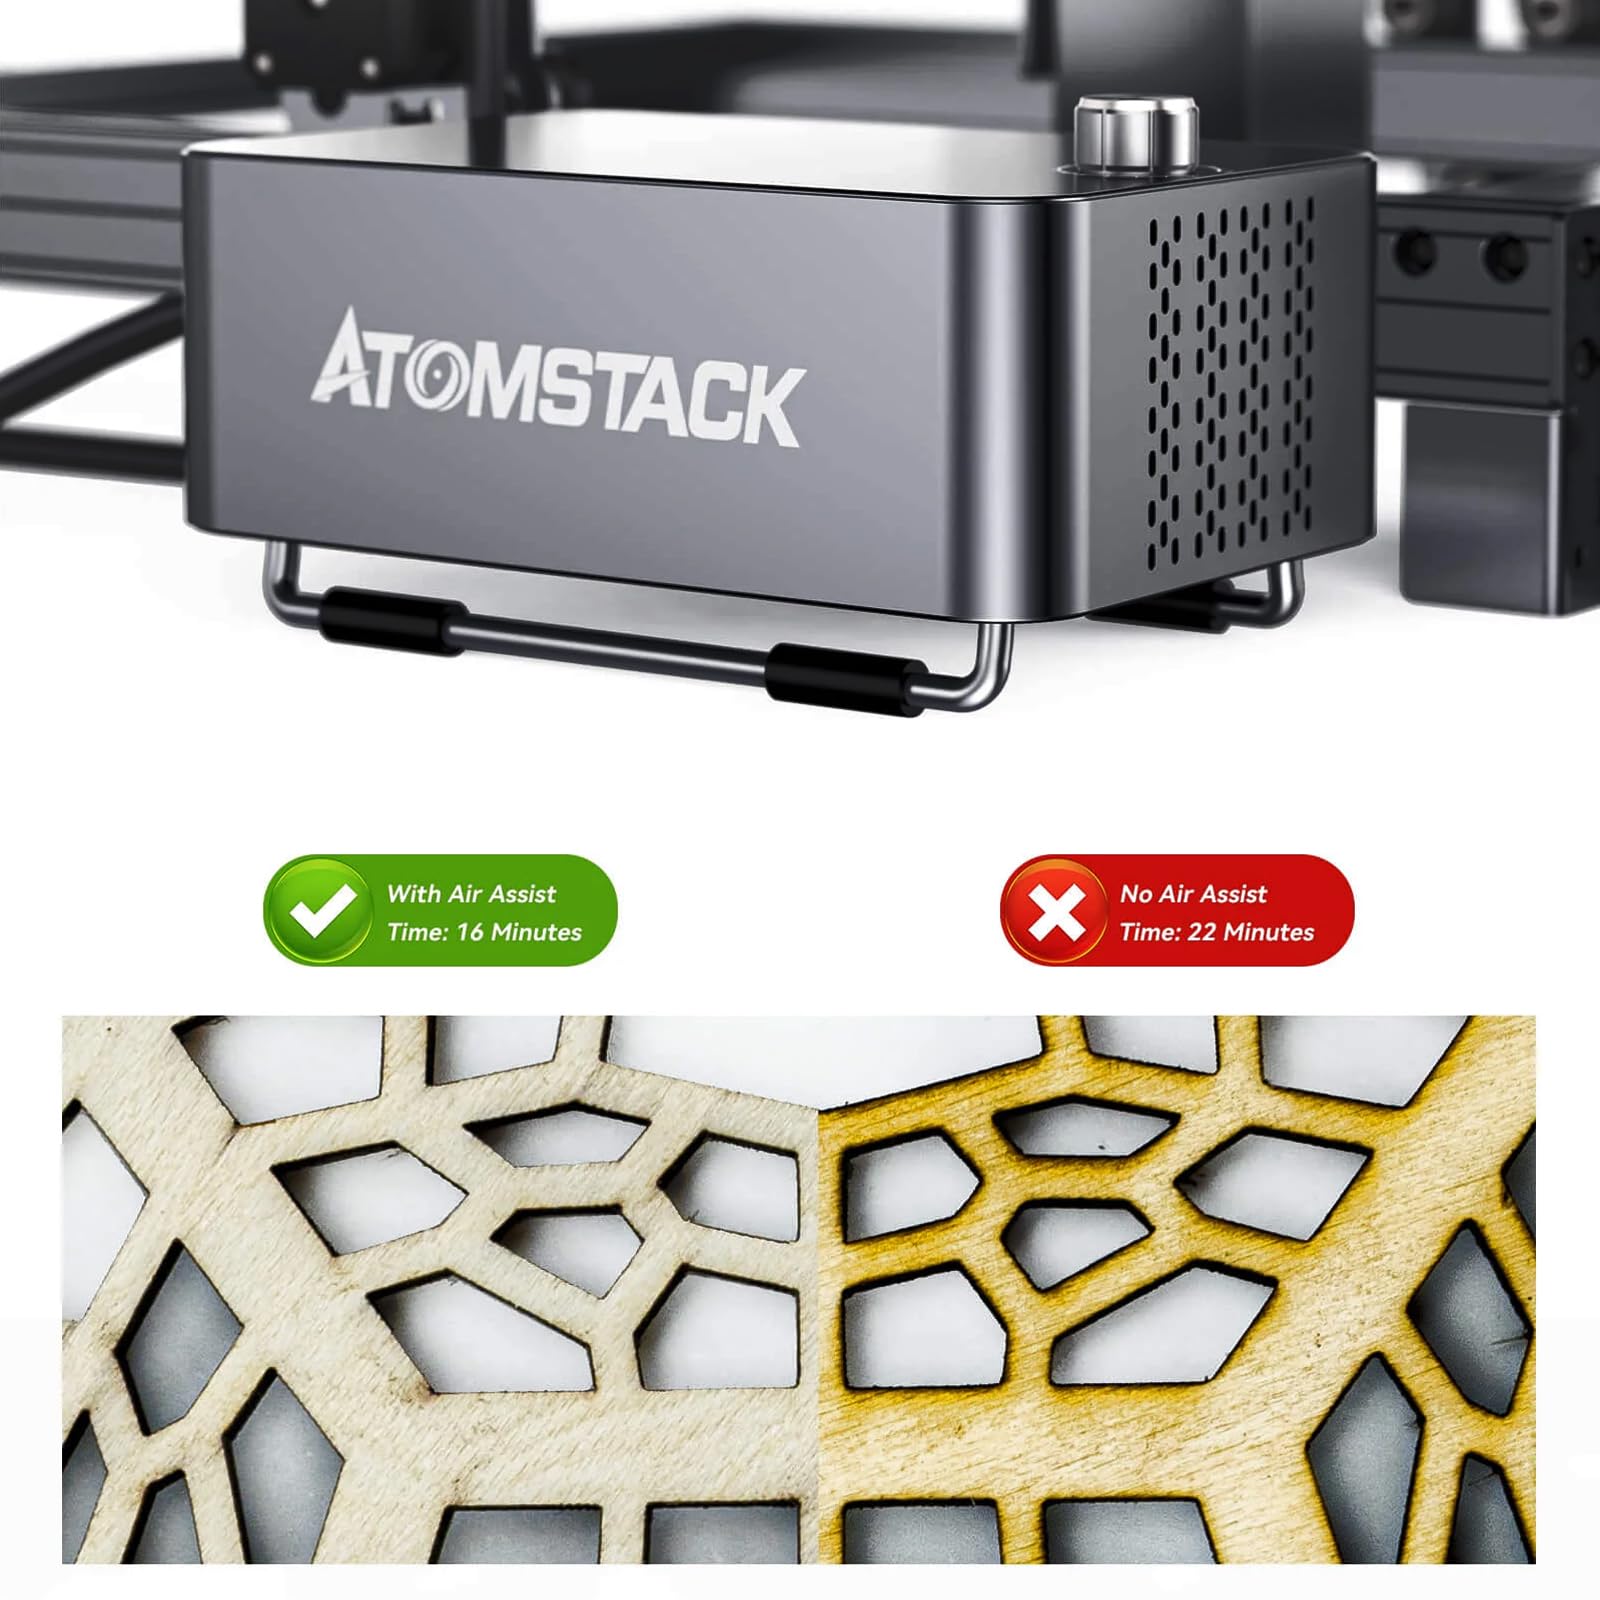 ATOMSTACK F60 Dual Pump Air Assist 10-60L/min, Automatic Switching Cleaner and Smoother Cutting Edge, Air Assist for A6 X6 A12 X12 A24 X24 Pro A20 A30 A40 A70 Series Laser Engraver Cutter